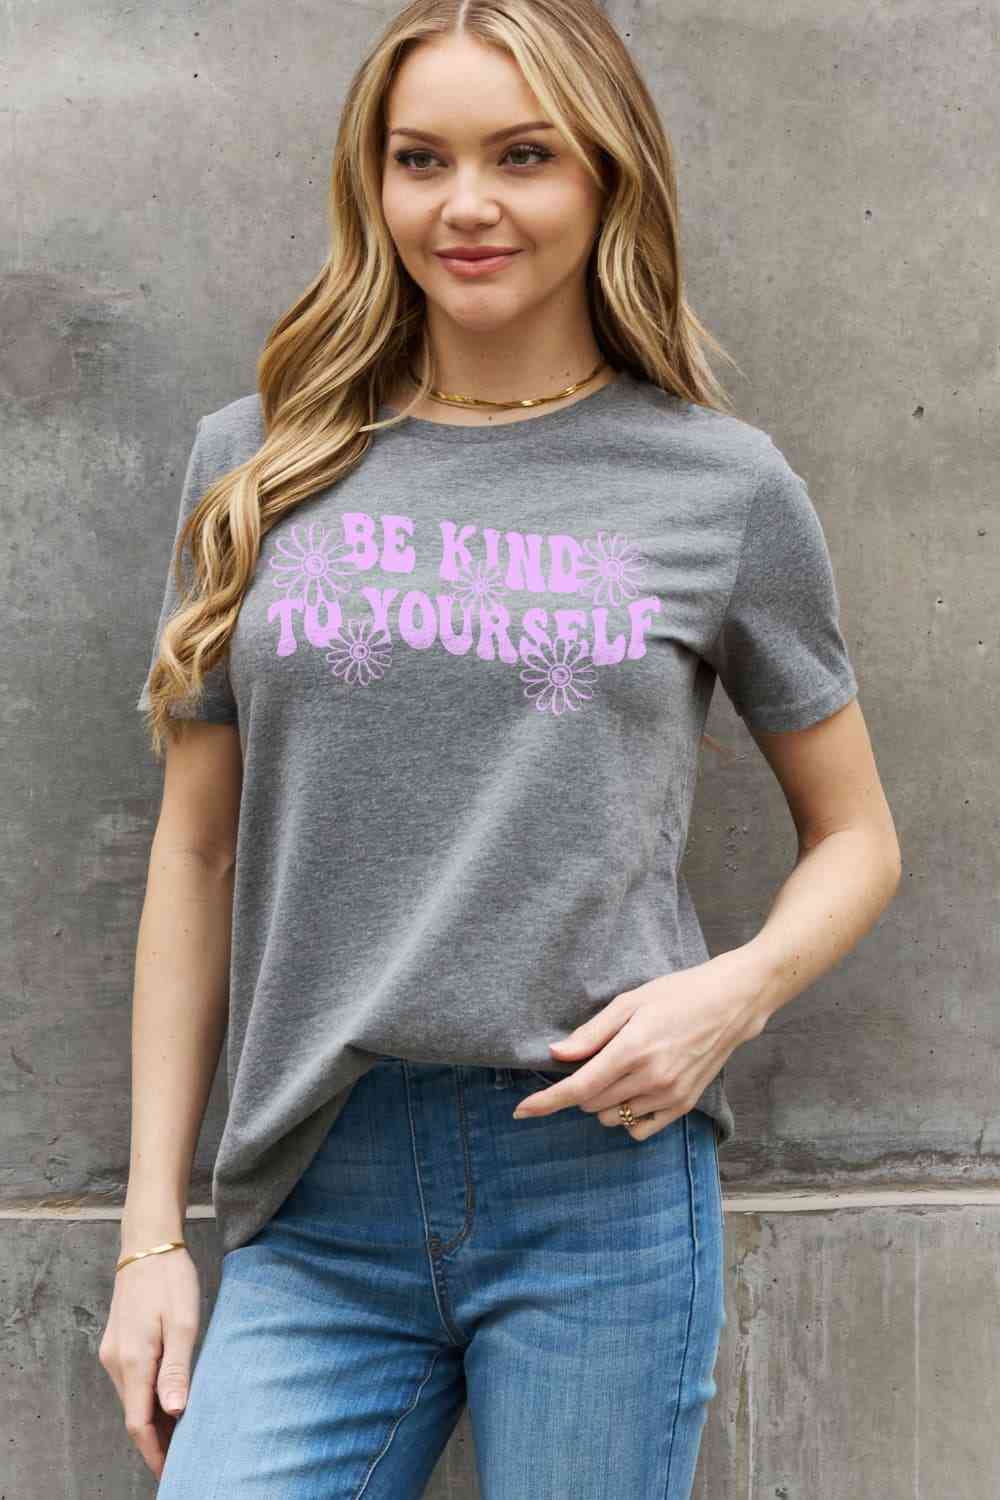 Simply Love Full Size BE KIND TO YOURSELF Flower Graphic Cotton Tee